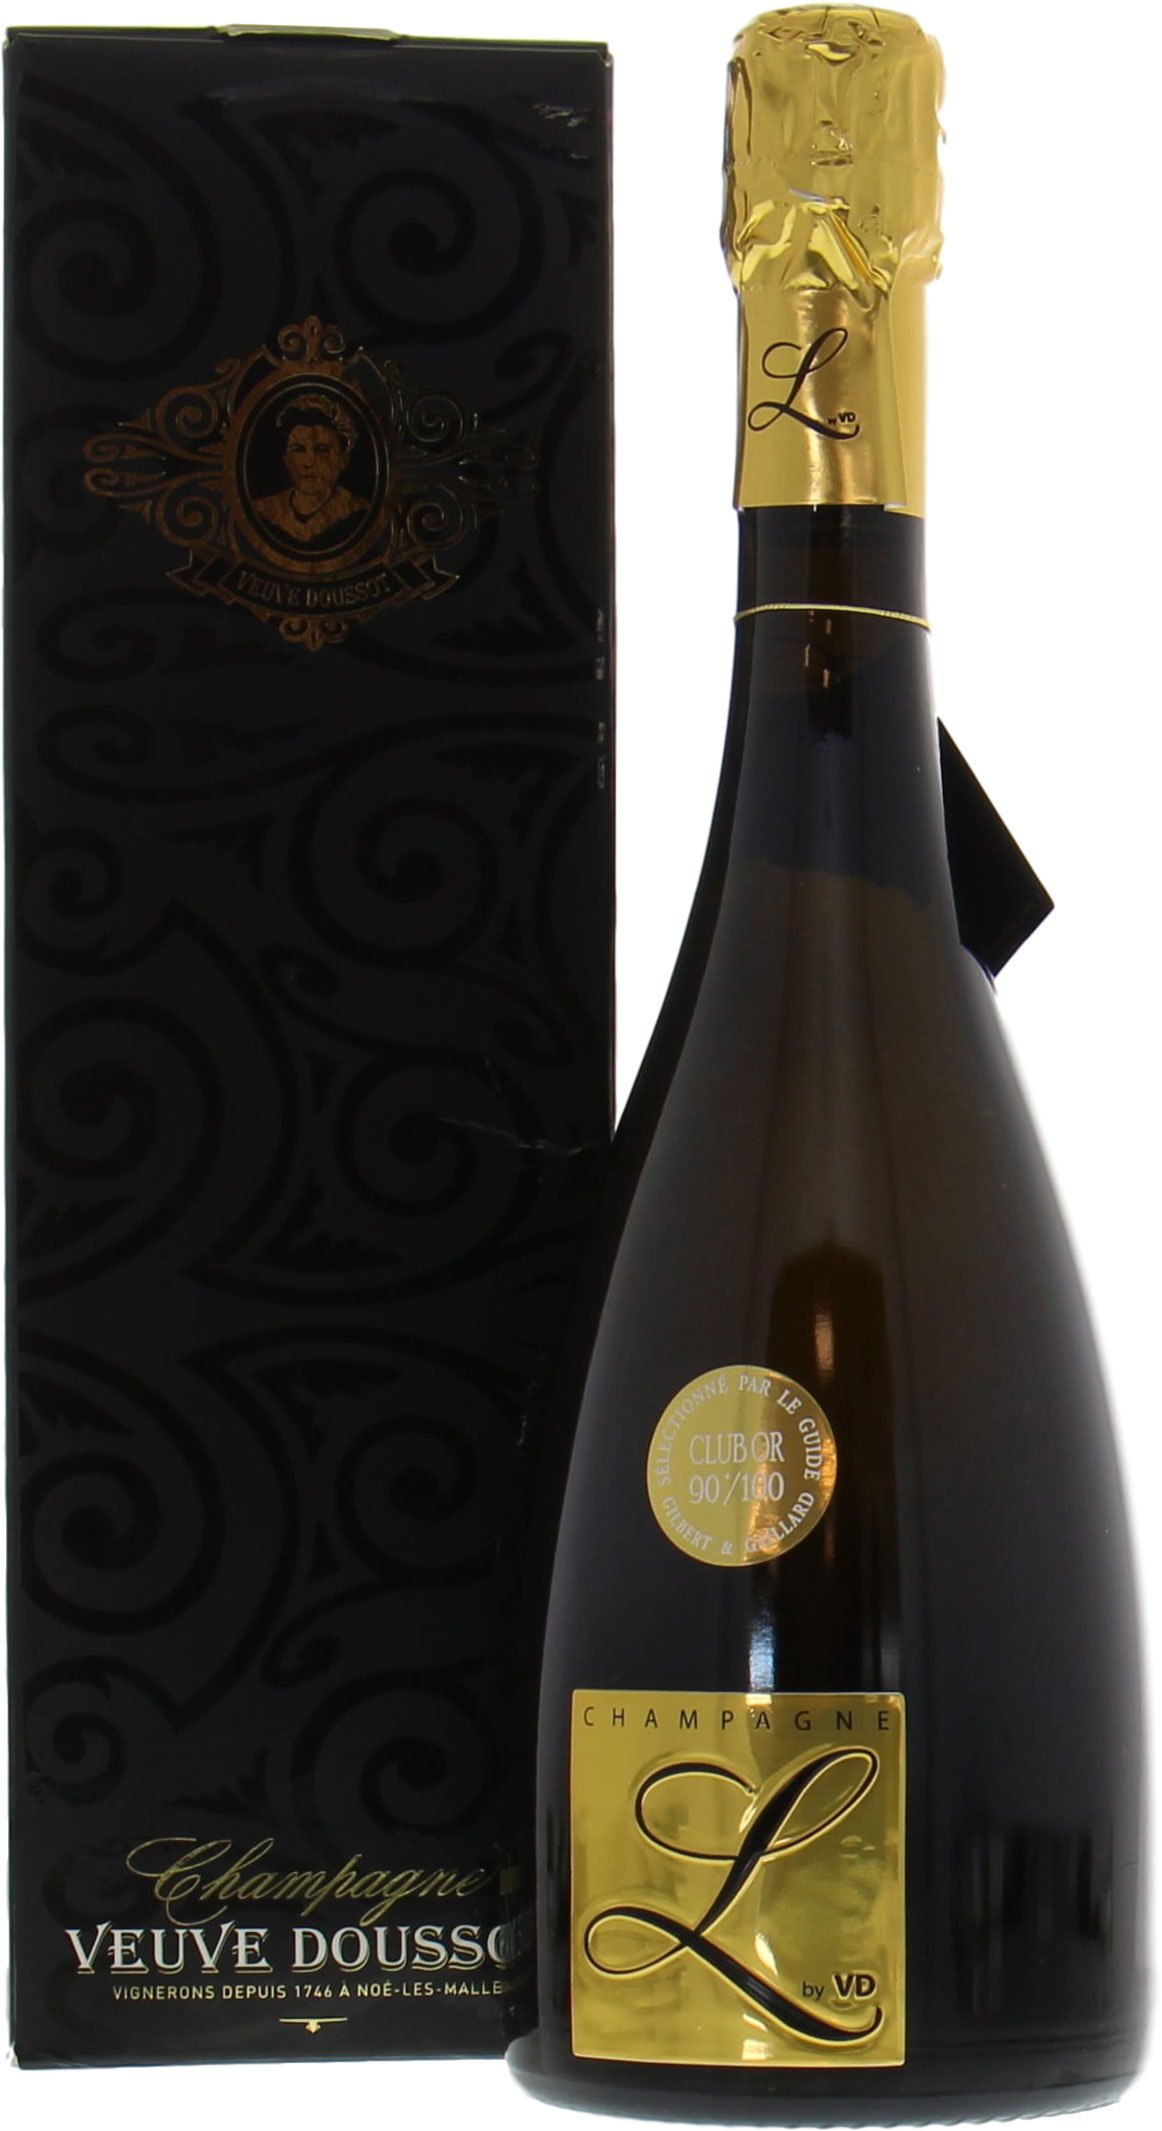 Veuve Doussot - L by VD Organic Cuvee NV From Original Wooden Case